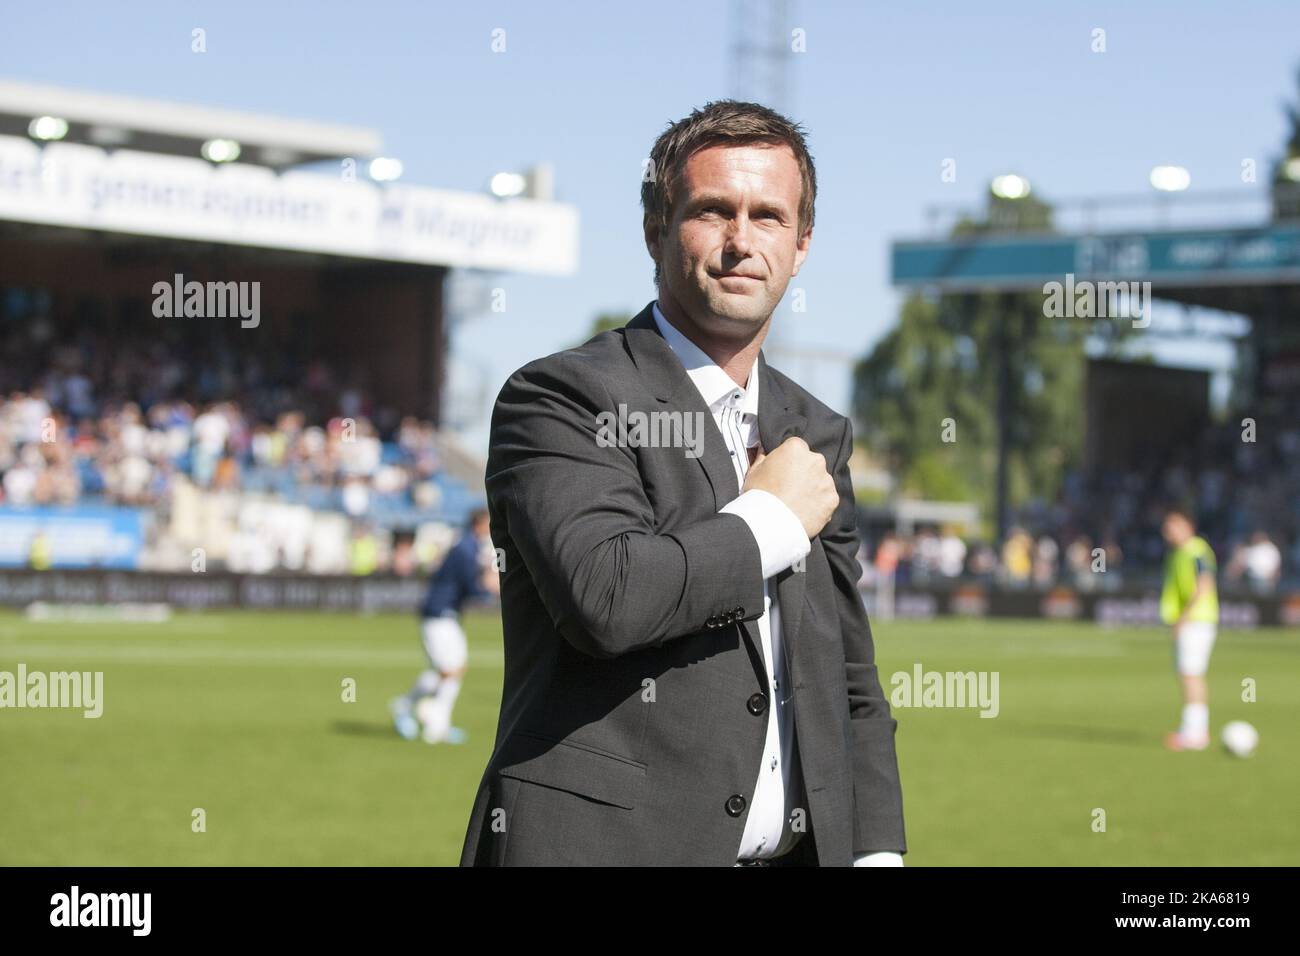 Outgoing manager of Stromsgodset FK and incoming manager of Scottish Premiership club Celtic Ronny Deila during farewell ceremony after half time of the match between Deila`s former club Stromsgodset and Haugesund in the Norwegian top football league in Drammen, 9 June 2014. Photo by Audun Braastad, NTB scanpix Stock Photo